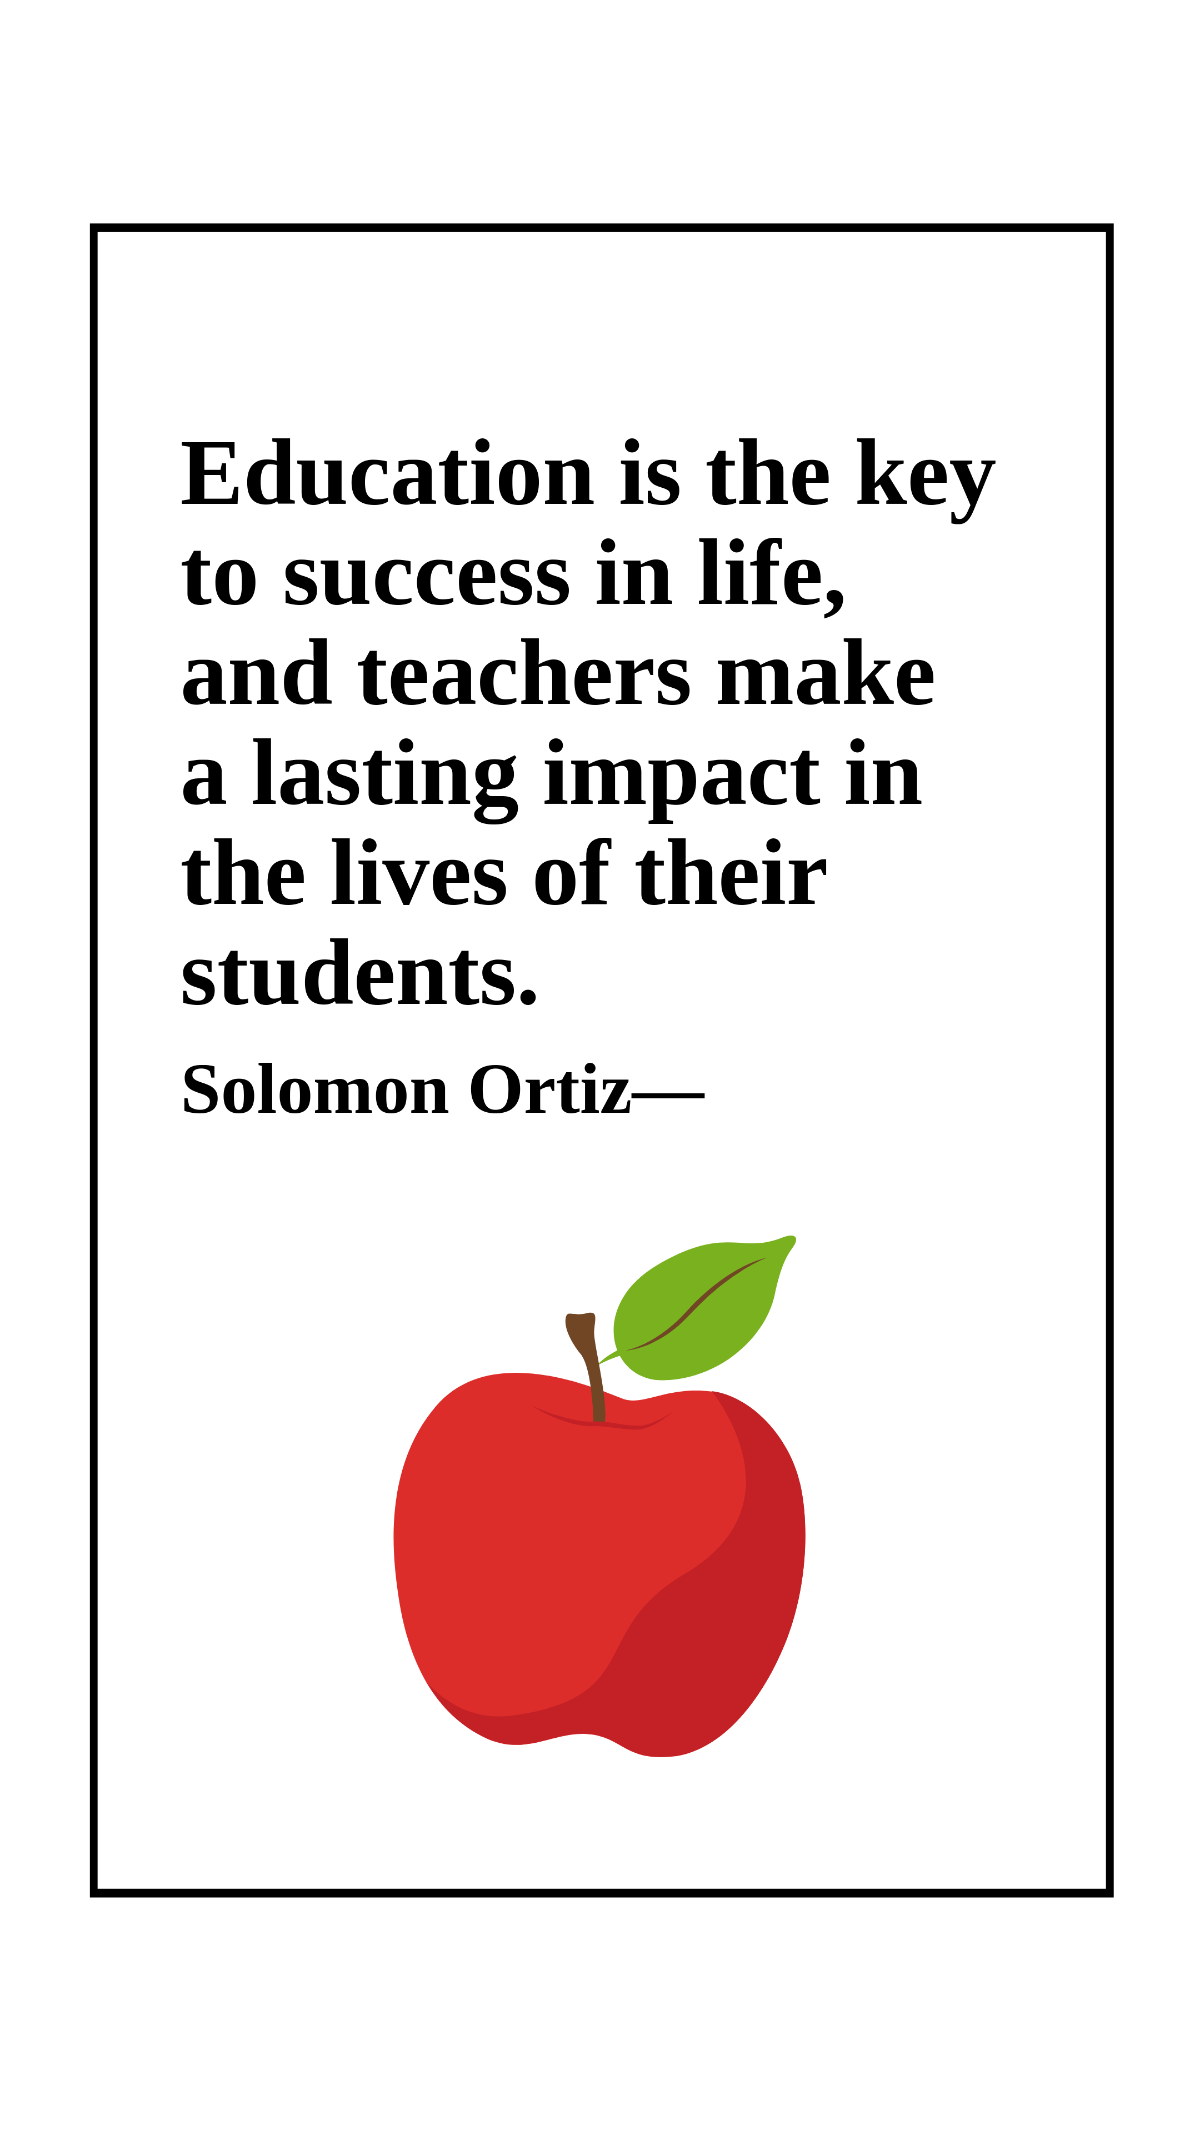 Free Solomon Ortiz - Education is the key to success in life, and teachers make a lasting impact in the lives of their students. Template